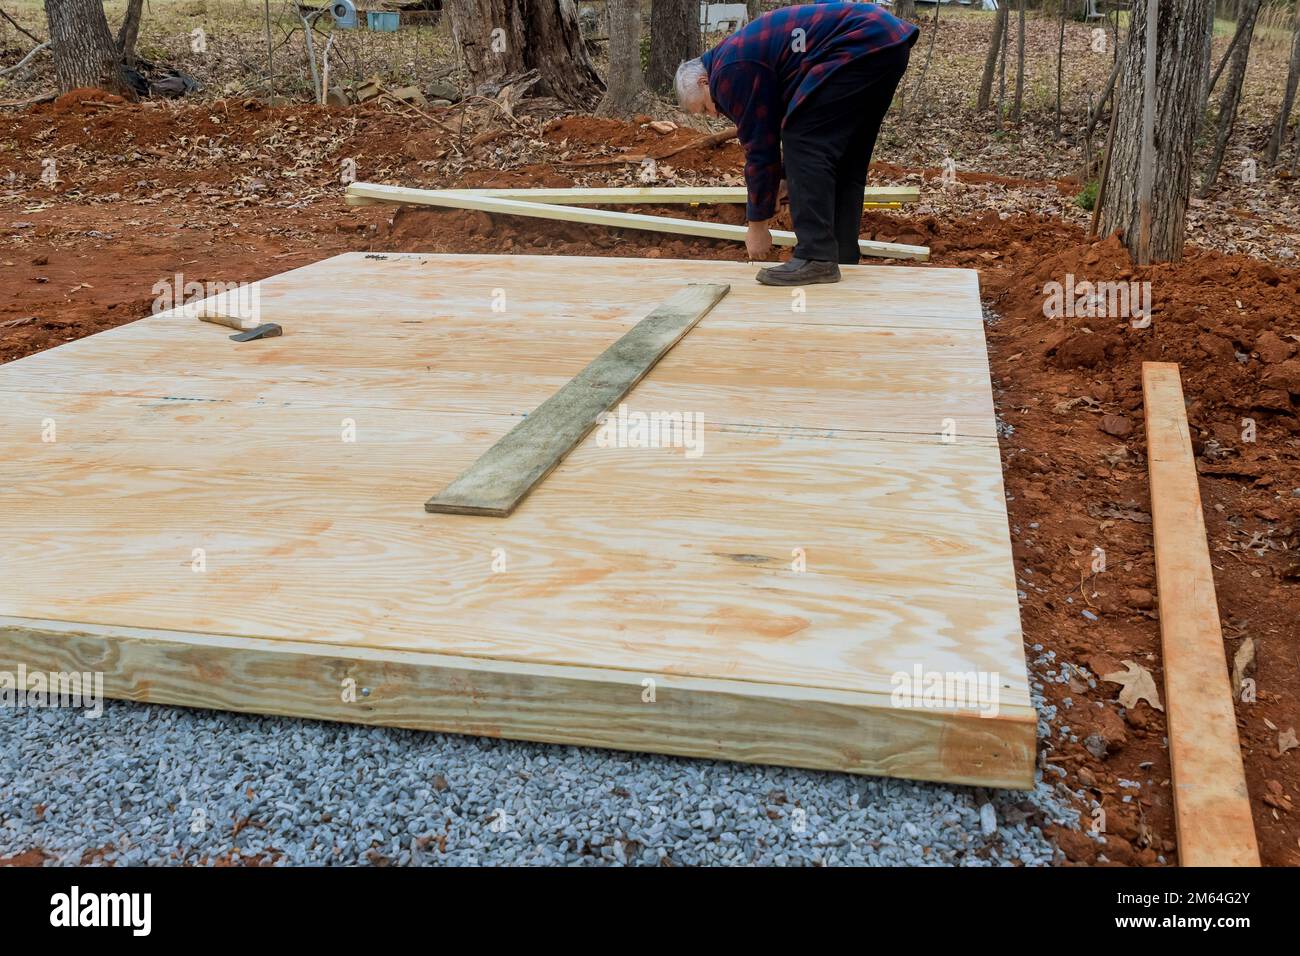 Wood framing beams that make up stick framework of shed deck foundation are made from hardwood Stock Photo